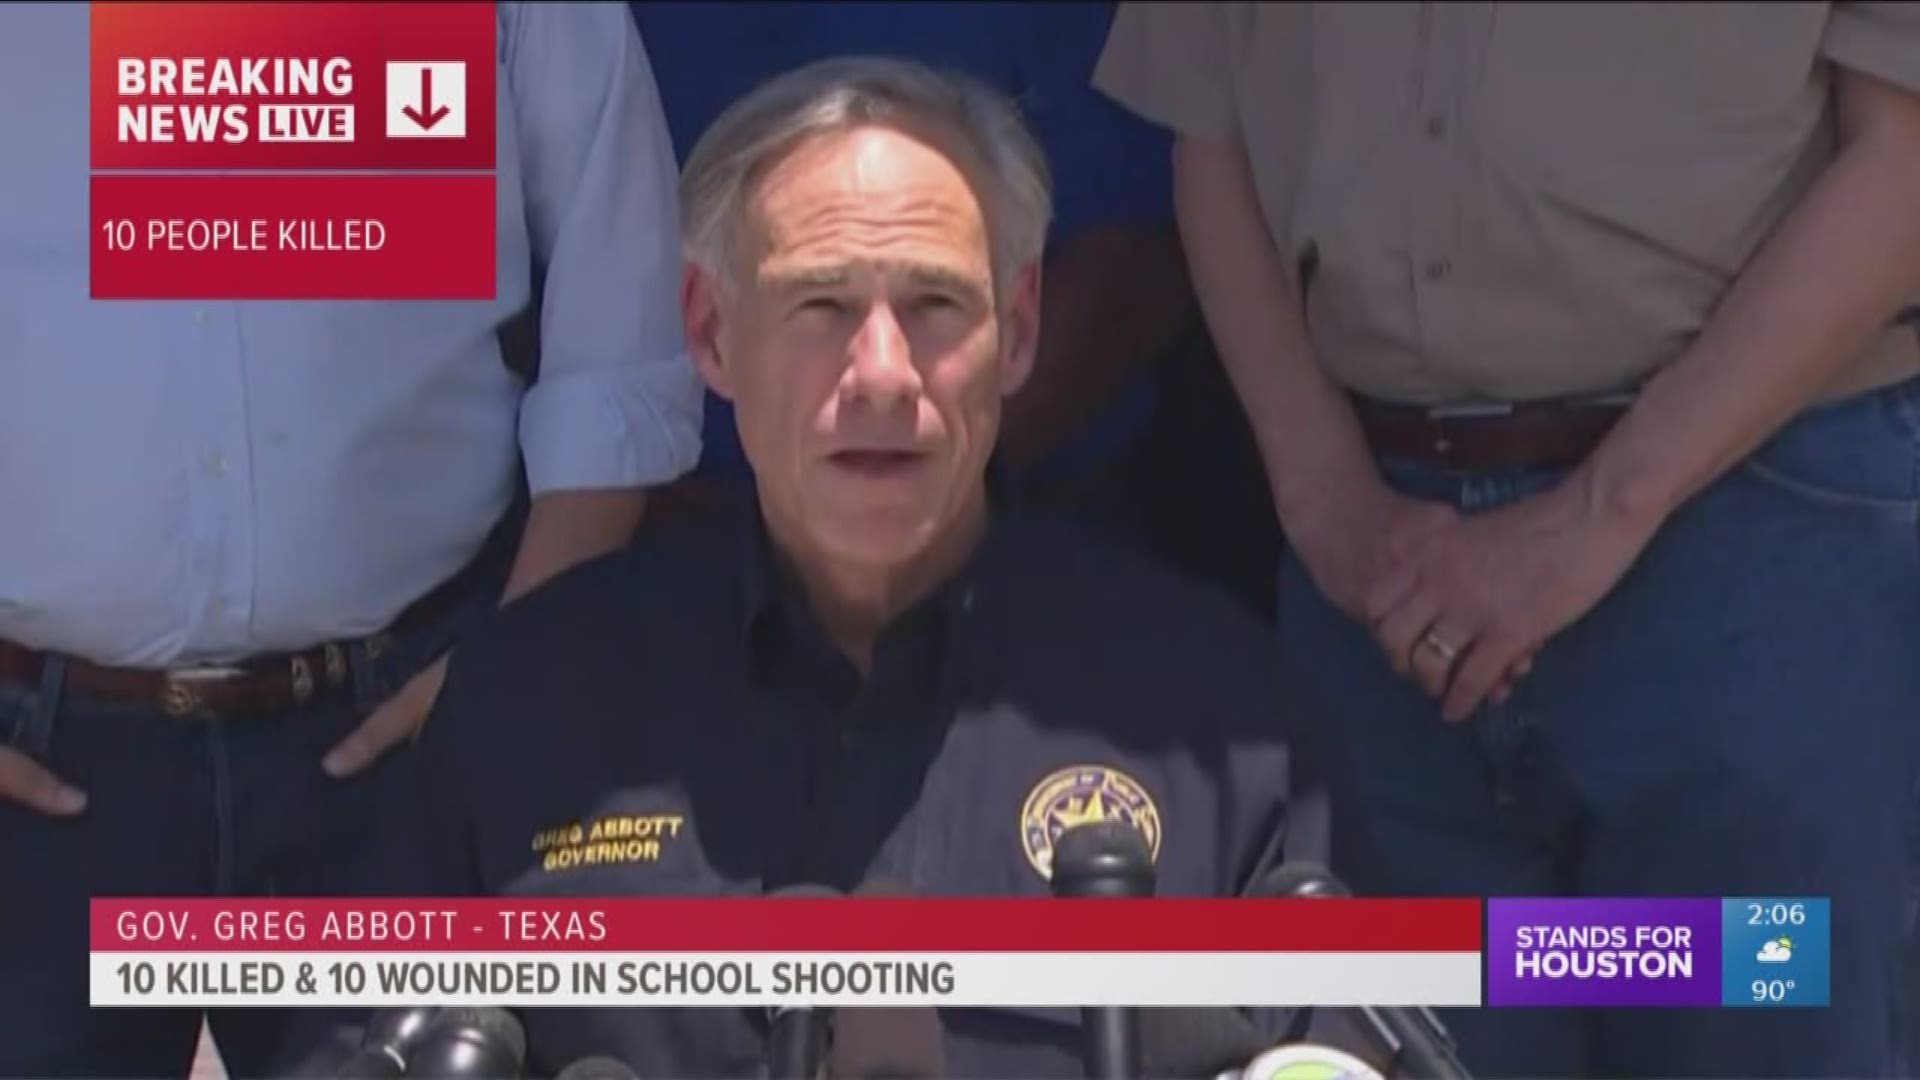 Texas governor Greg Abbott shared information at a presser following the deadly shooting at Santa Fe High School